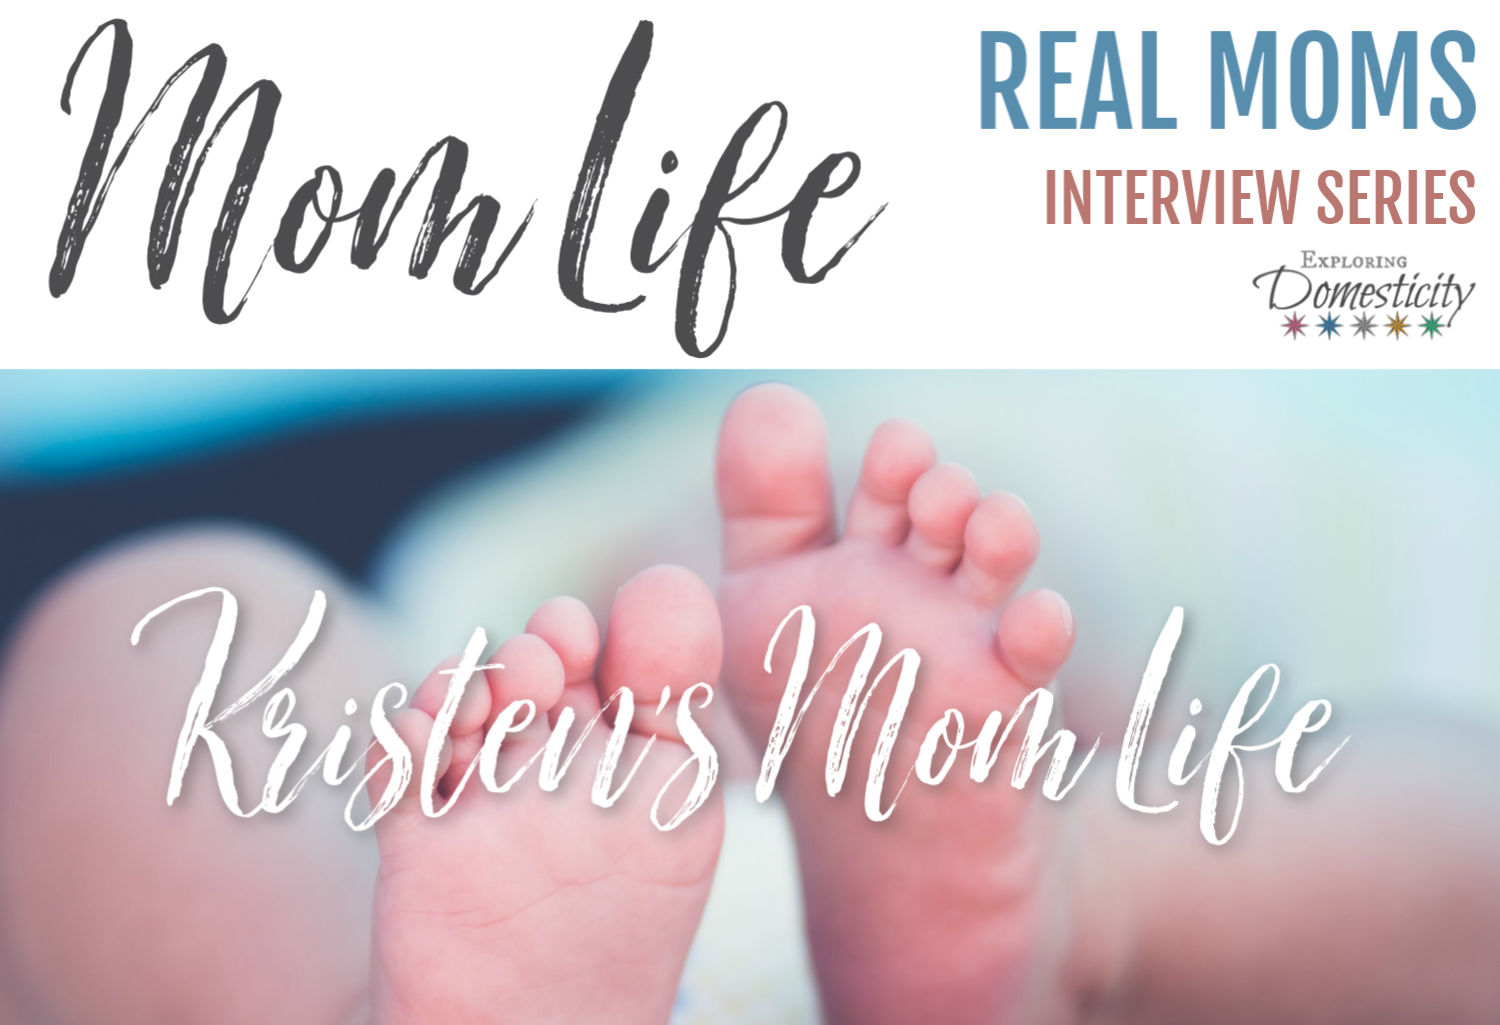 Kristen's Mom Life - Real Moms Interview Series